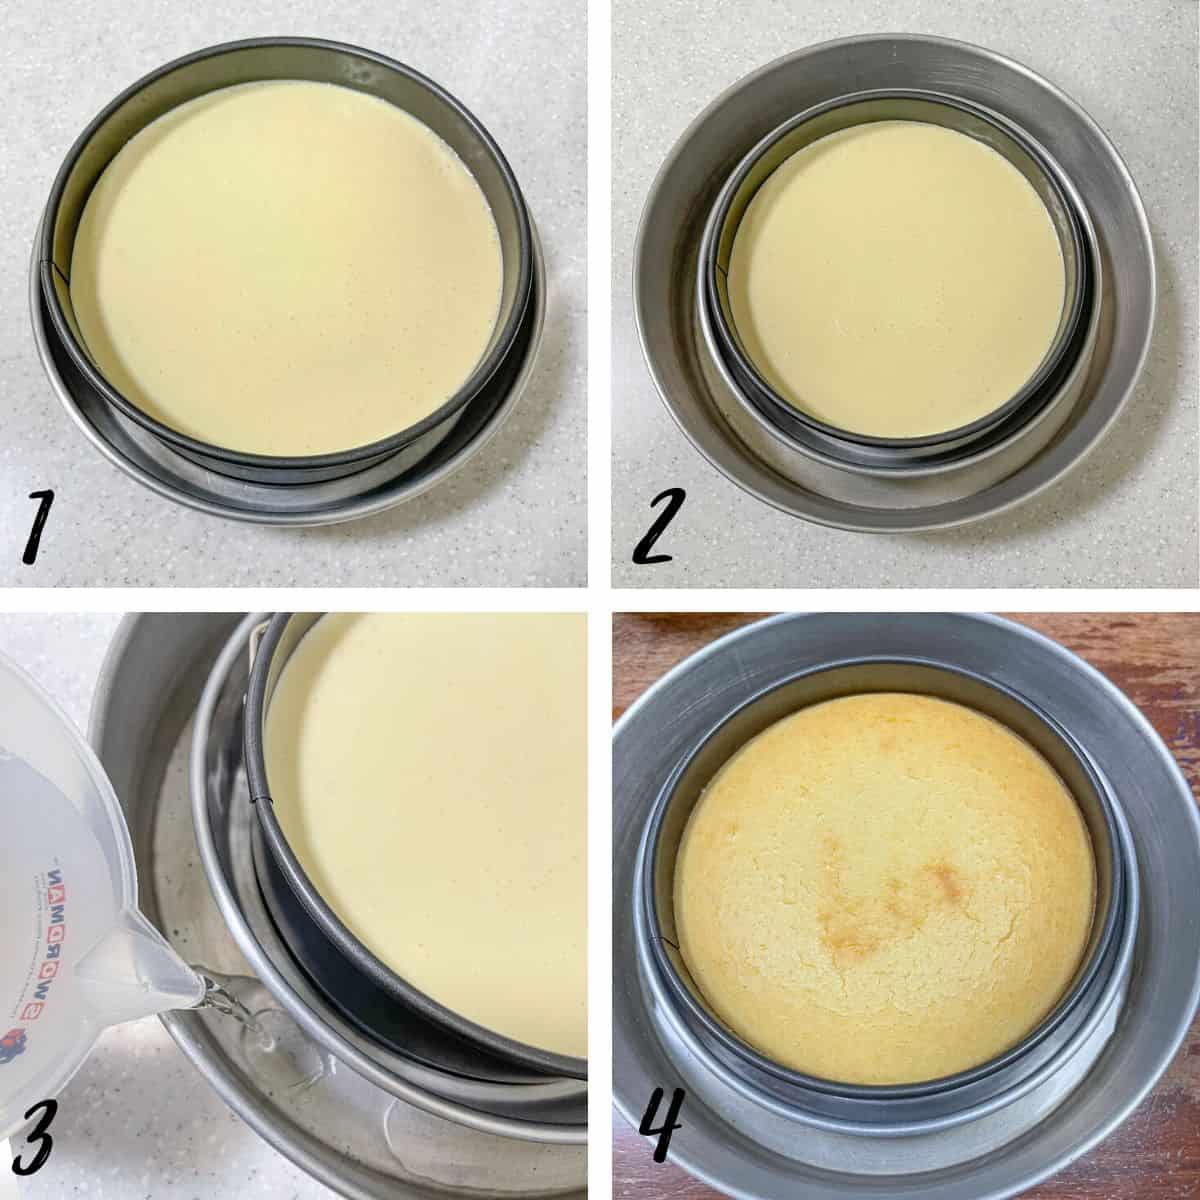 A poster of 4 images showing how to create a waterbath for baking.